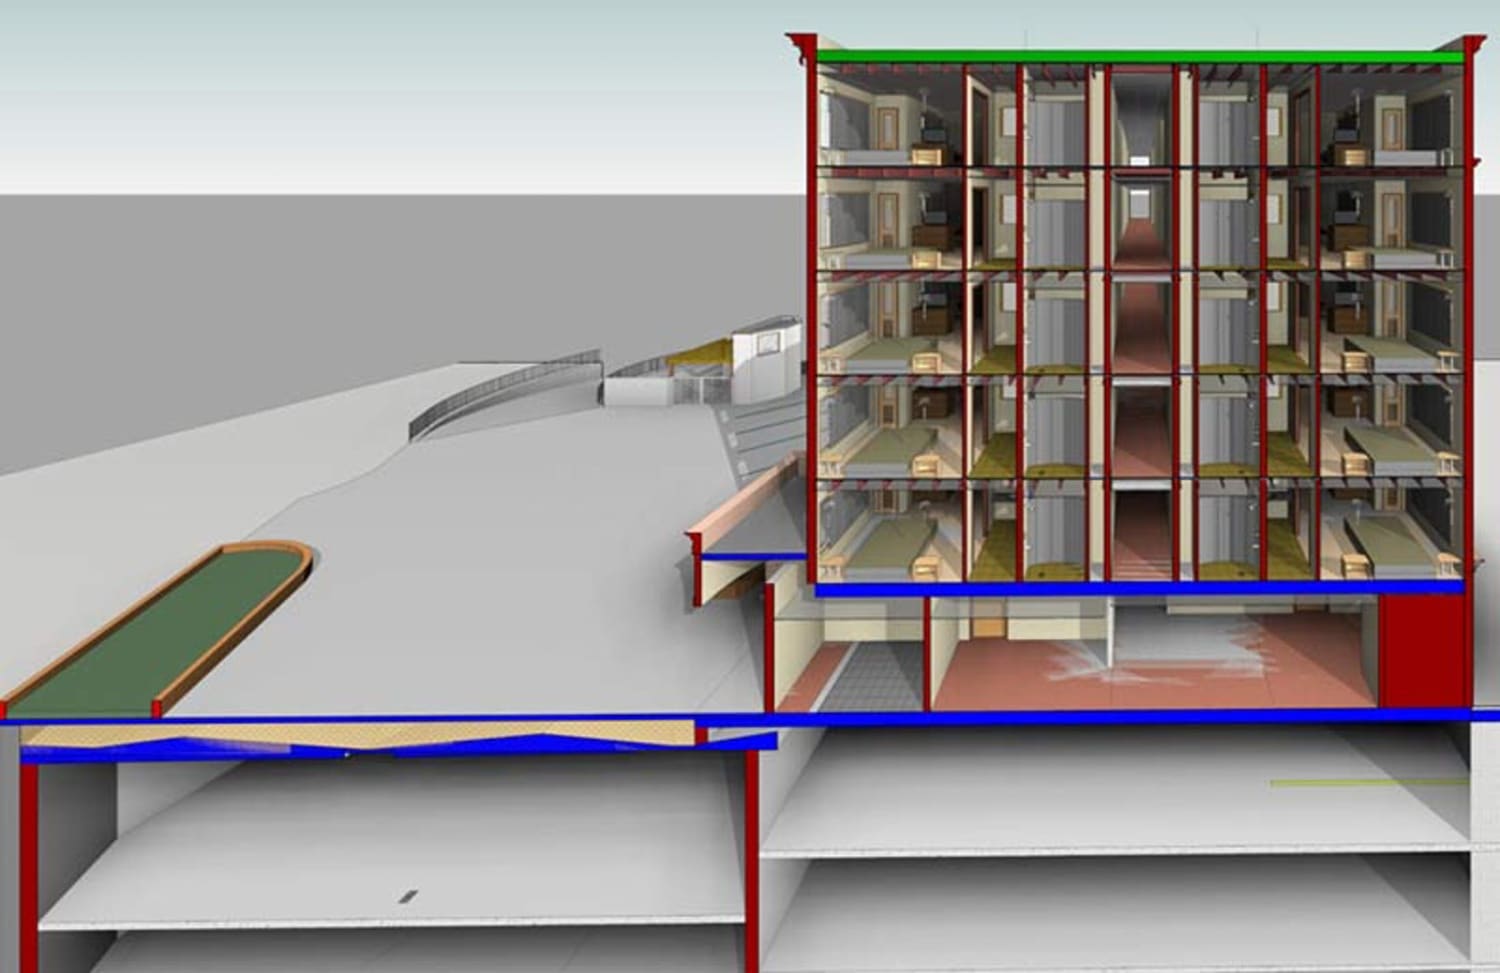 BIM Models for a hospitality building with LOD 300